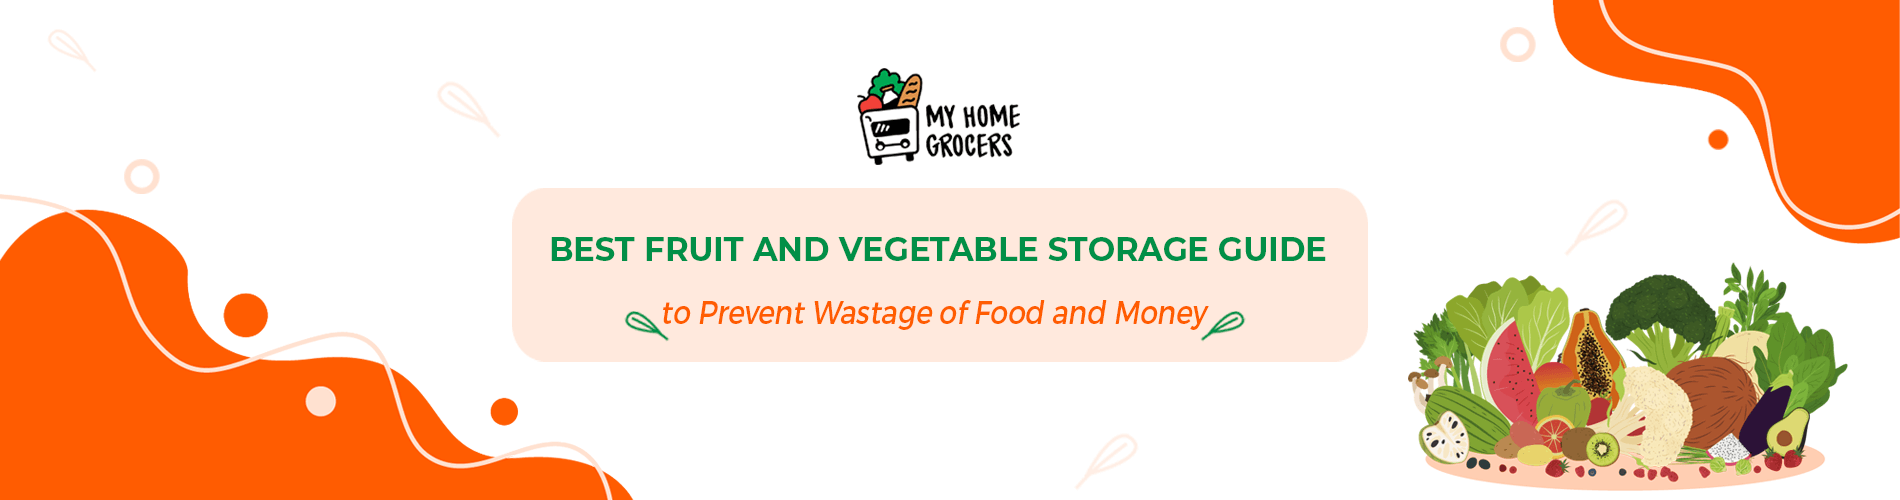 Best Fruit and Vegetable Storage Guide to Prevent Wastage of Food and Money